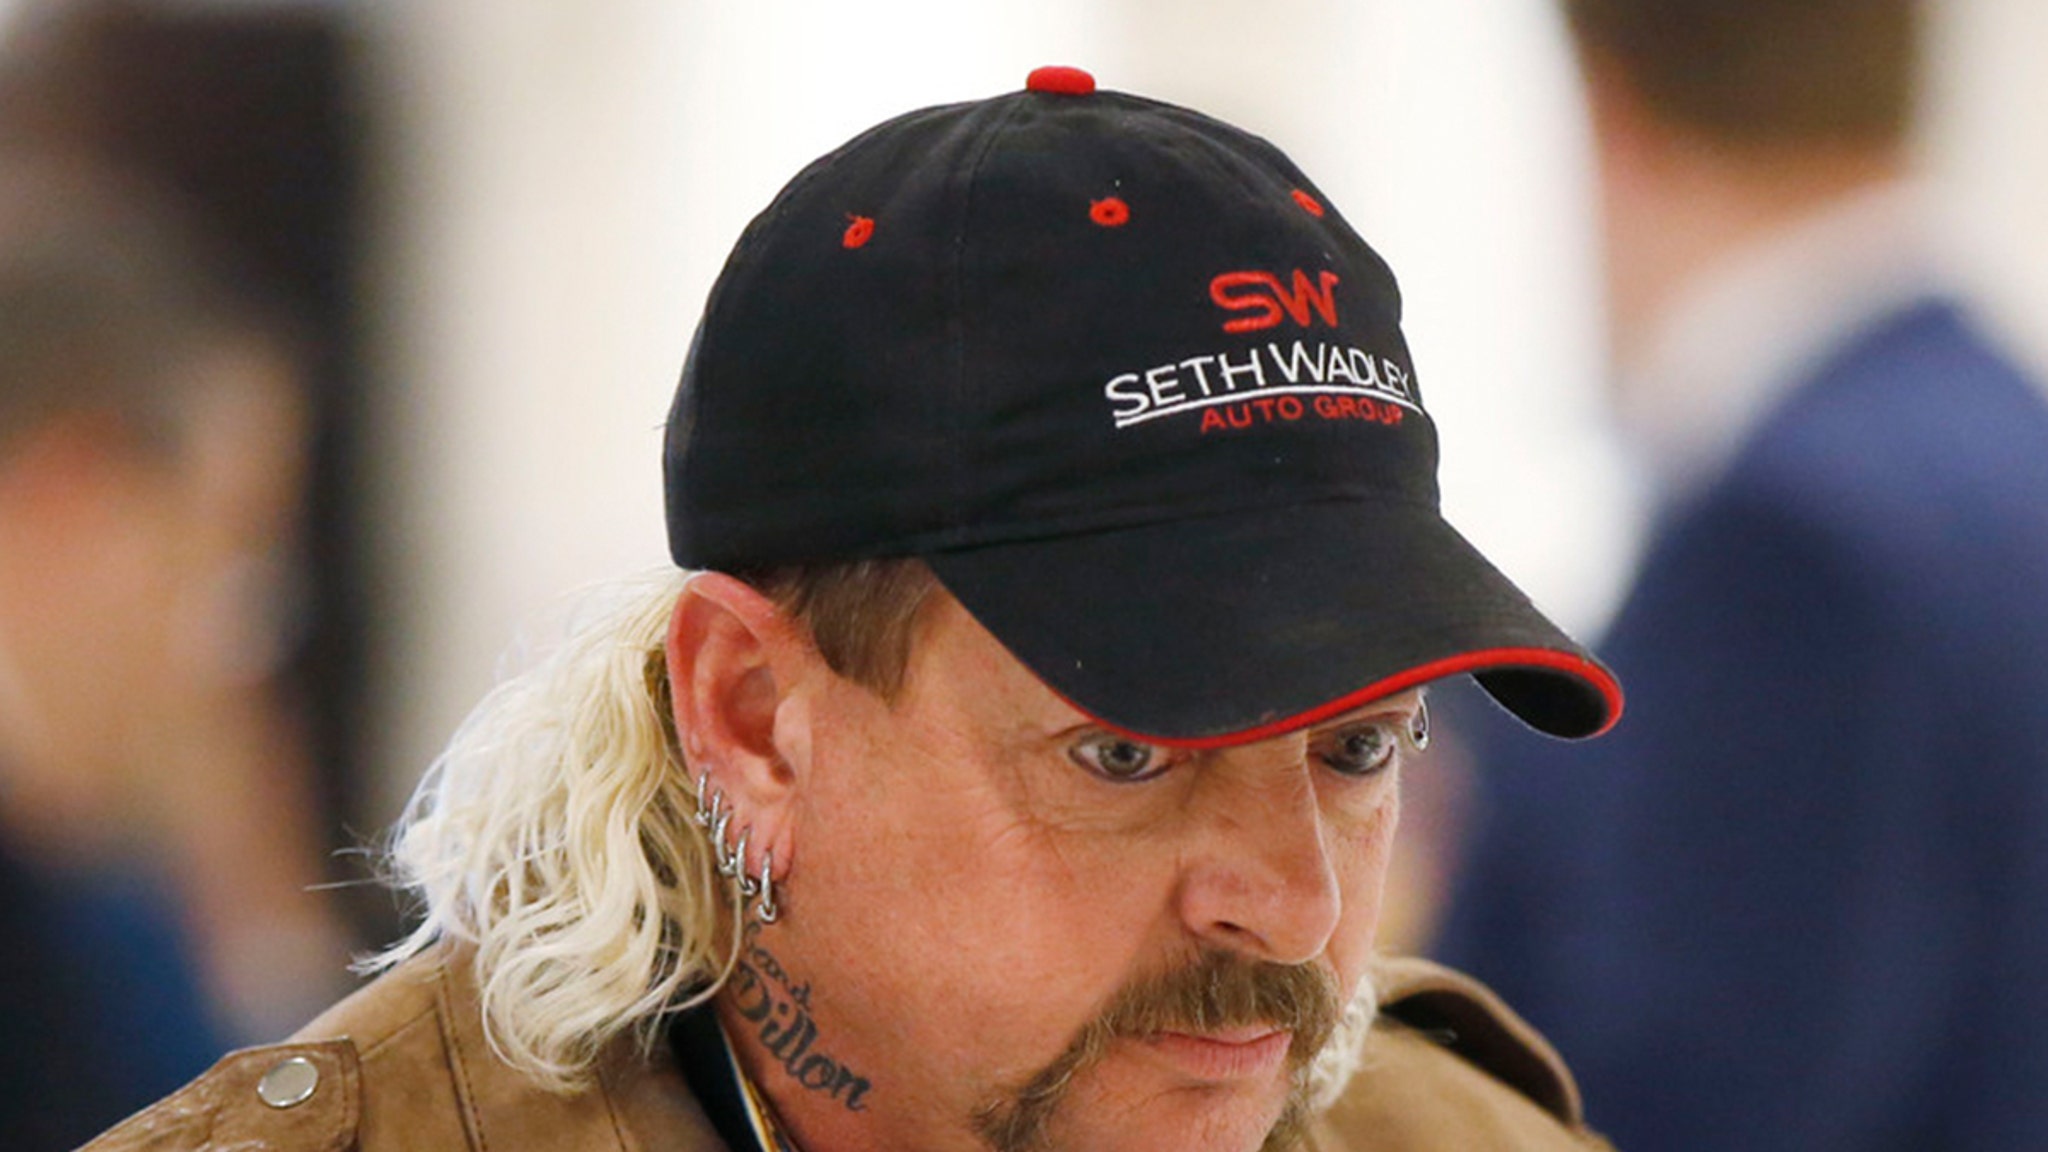 Joe Exotic’s father dies of COVID, hoping for apology before funeral